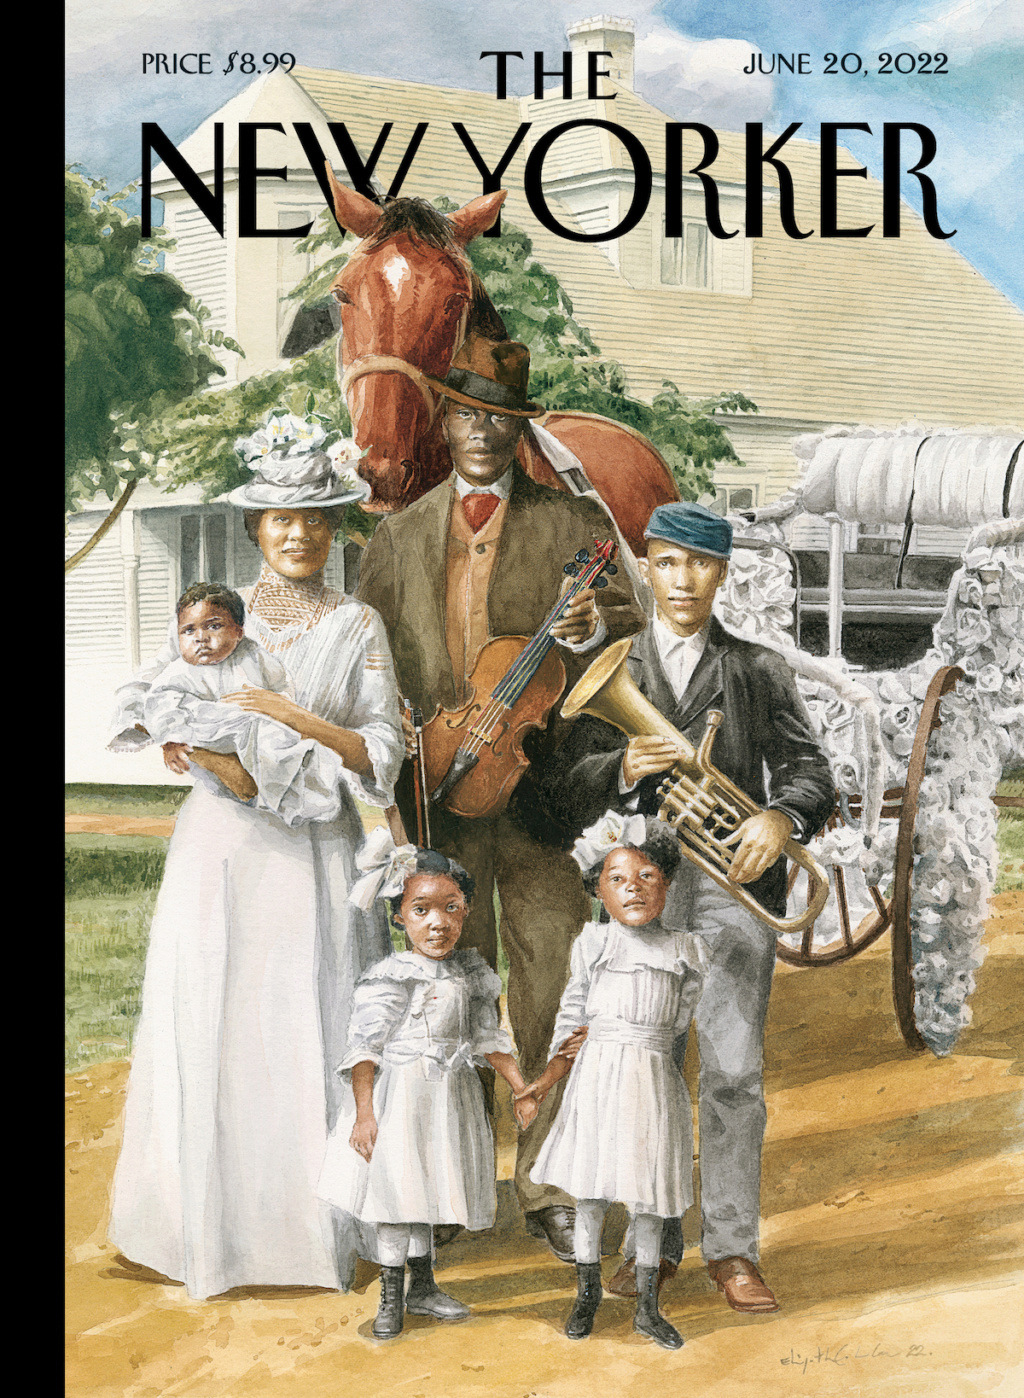 The New Yorker : Les couvertures - Page 3 157_ye10